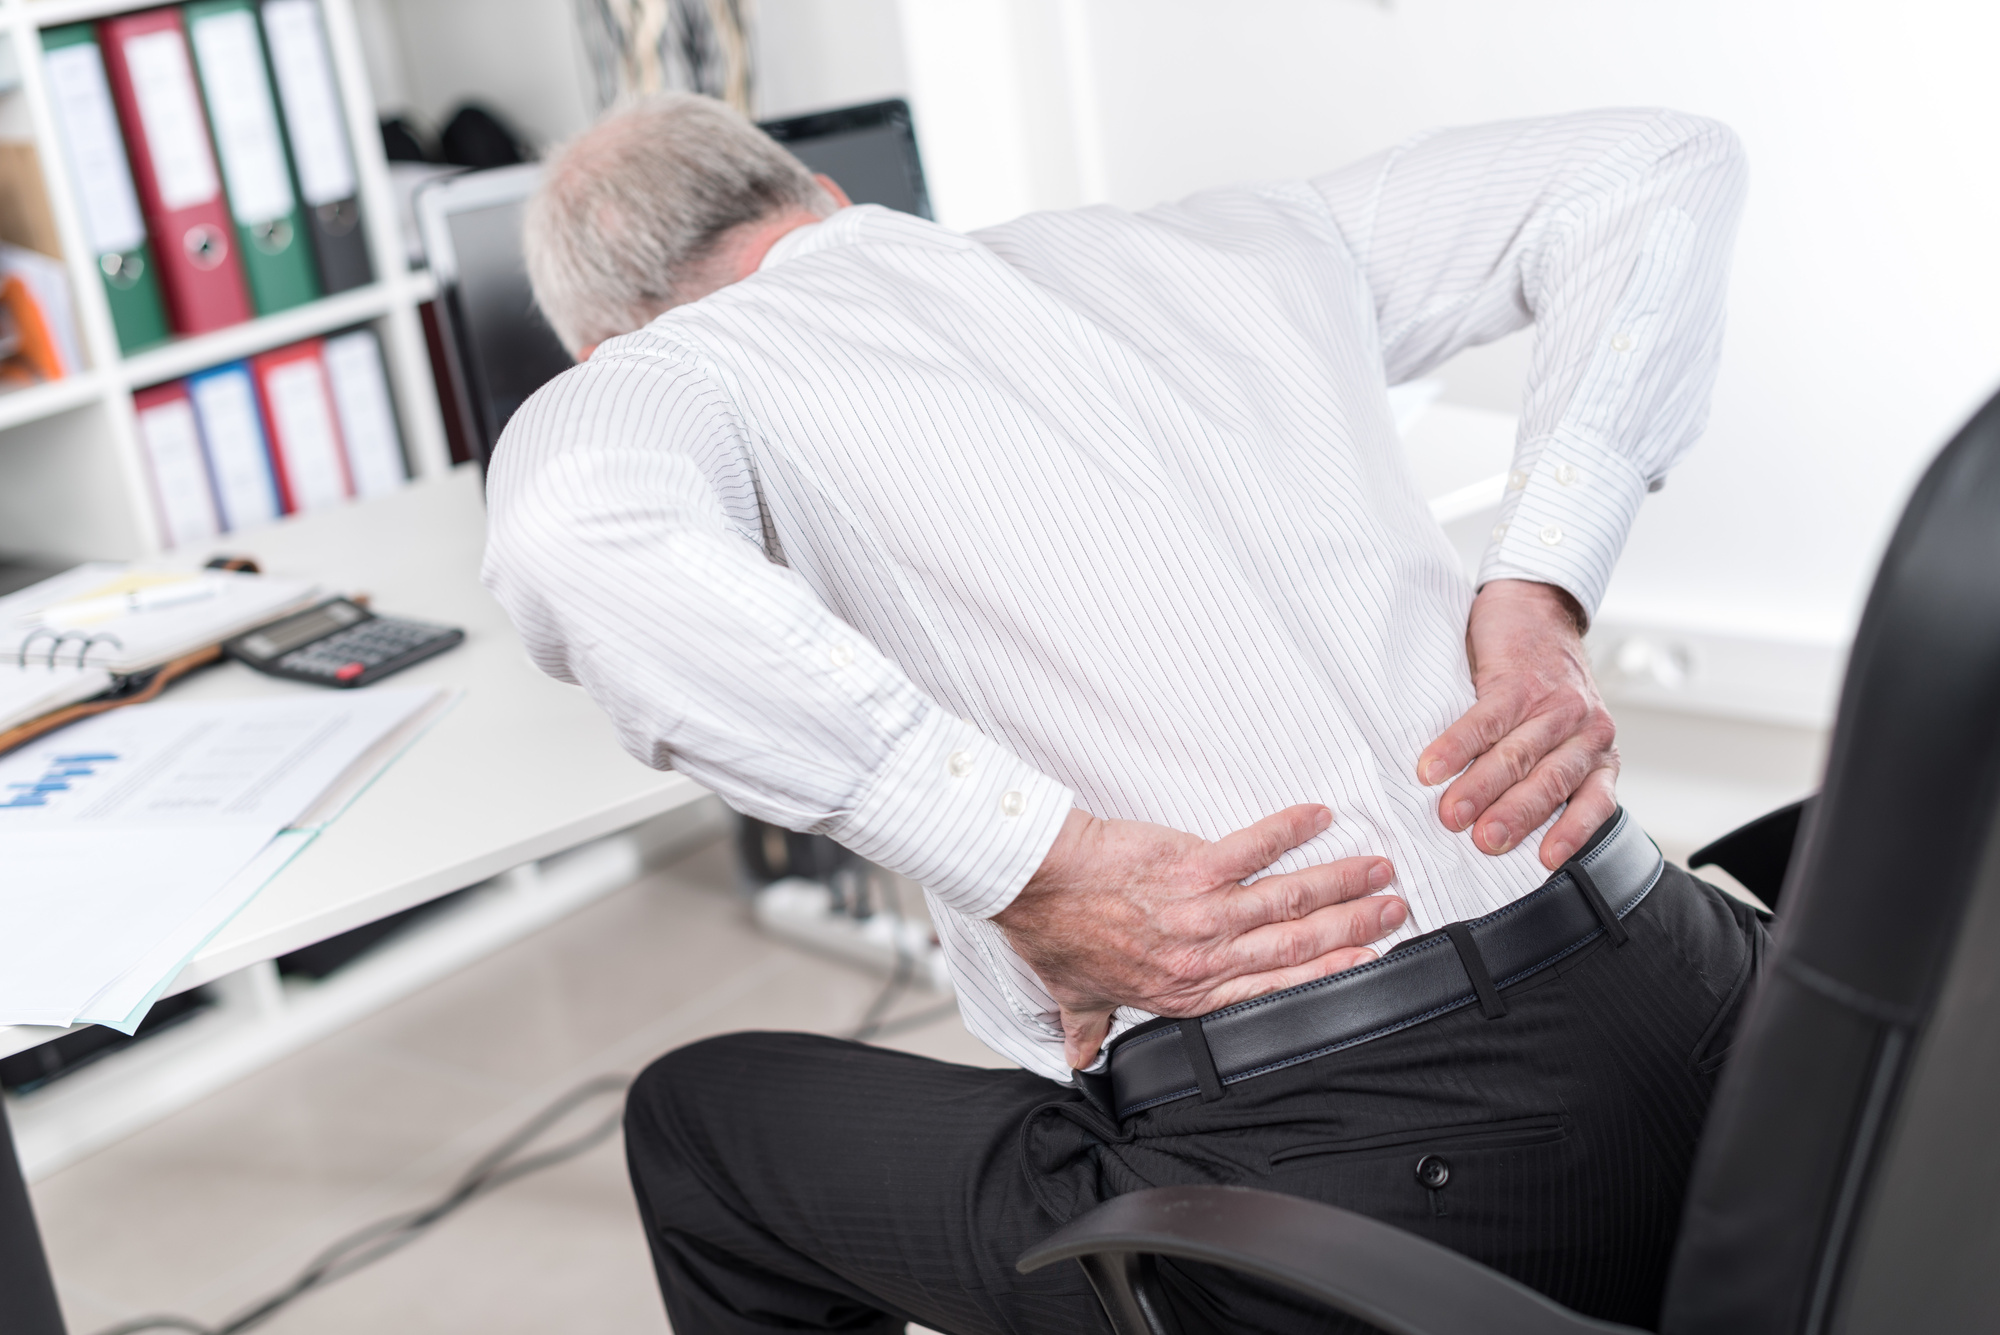 How to Prevent Back Pain: 10 Tips for Back Pain Relief | Healthy B Daily